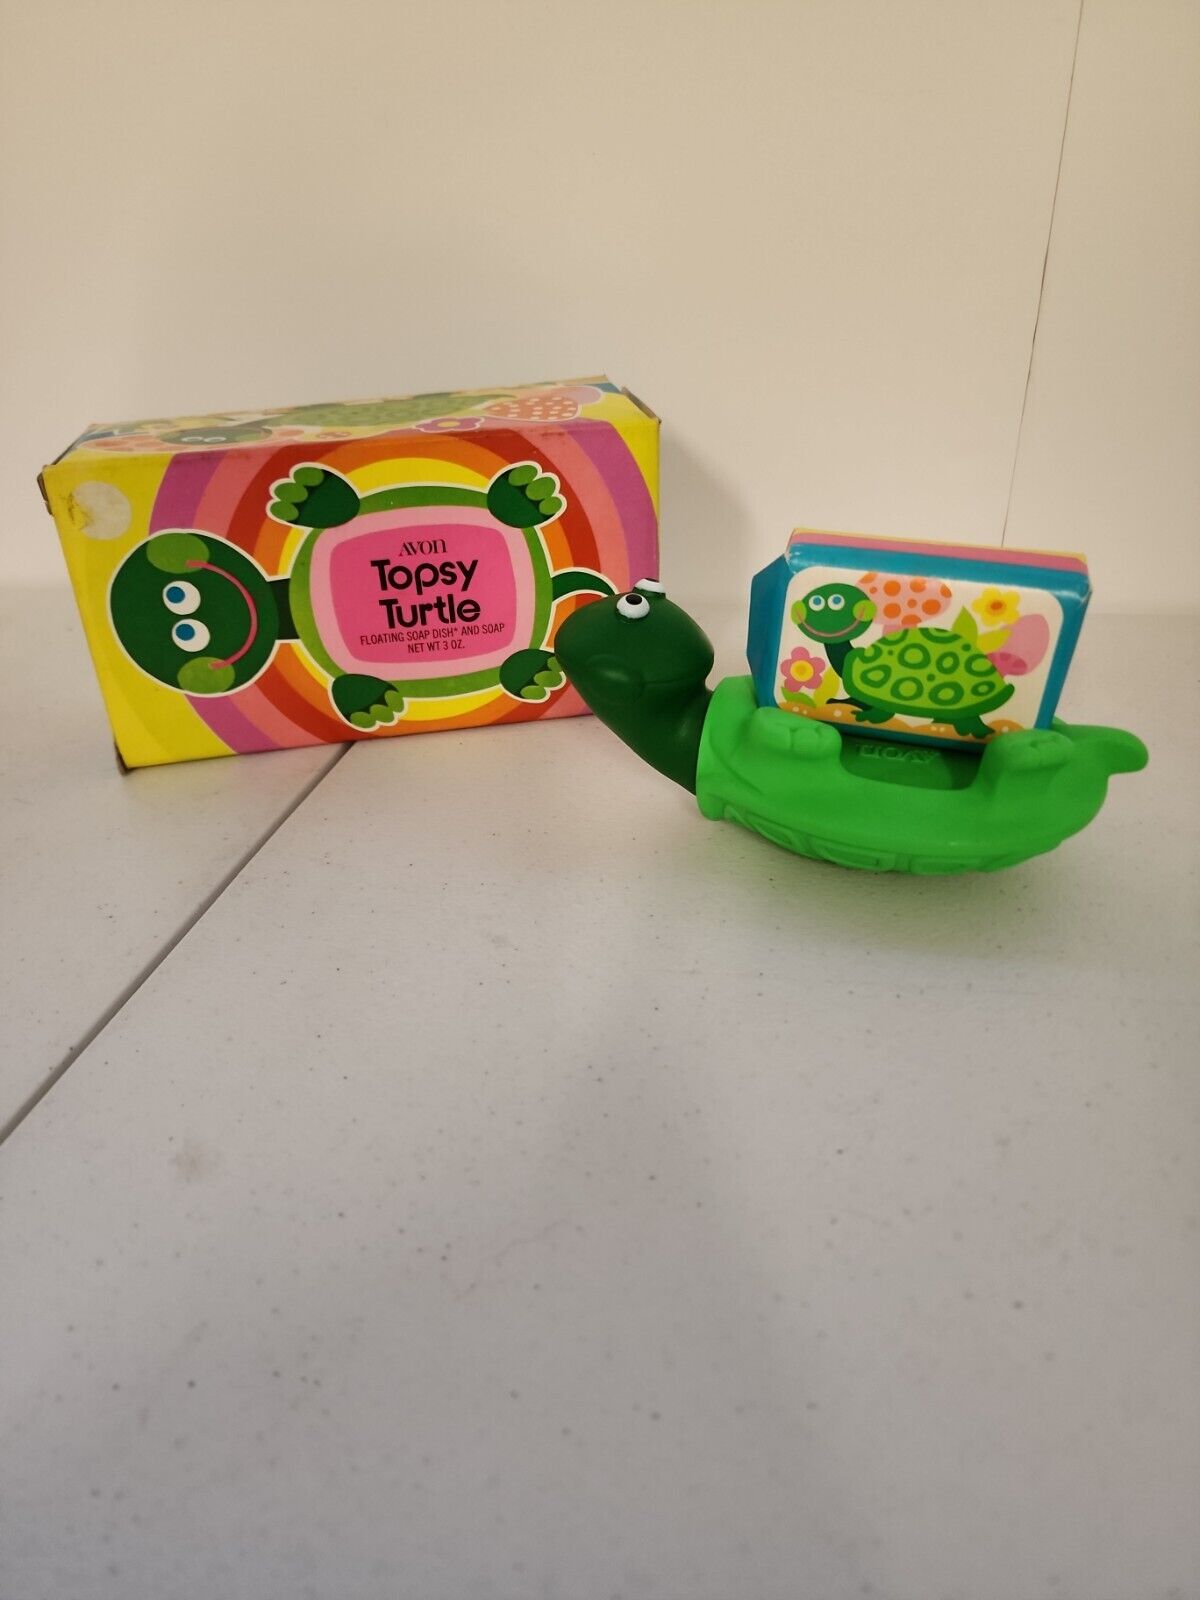 Avon Topsy Turtle Floating Soap Dish And Soap